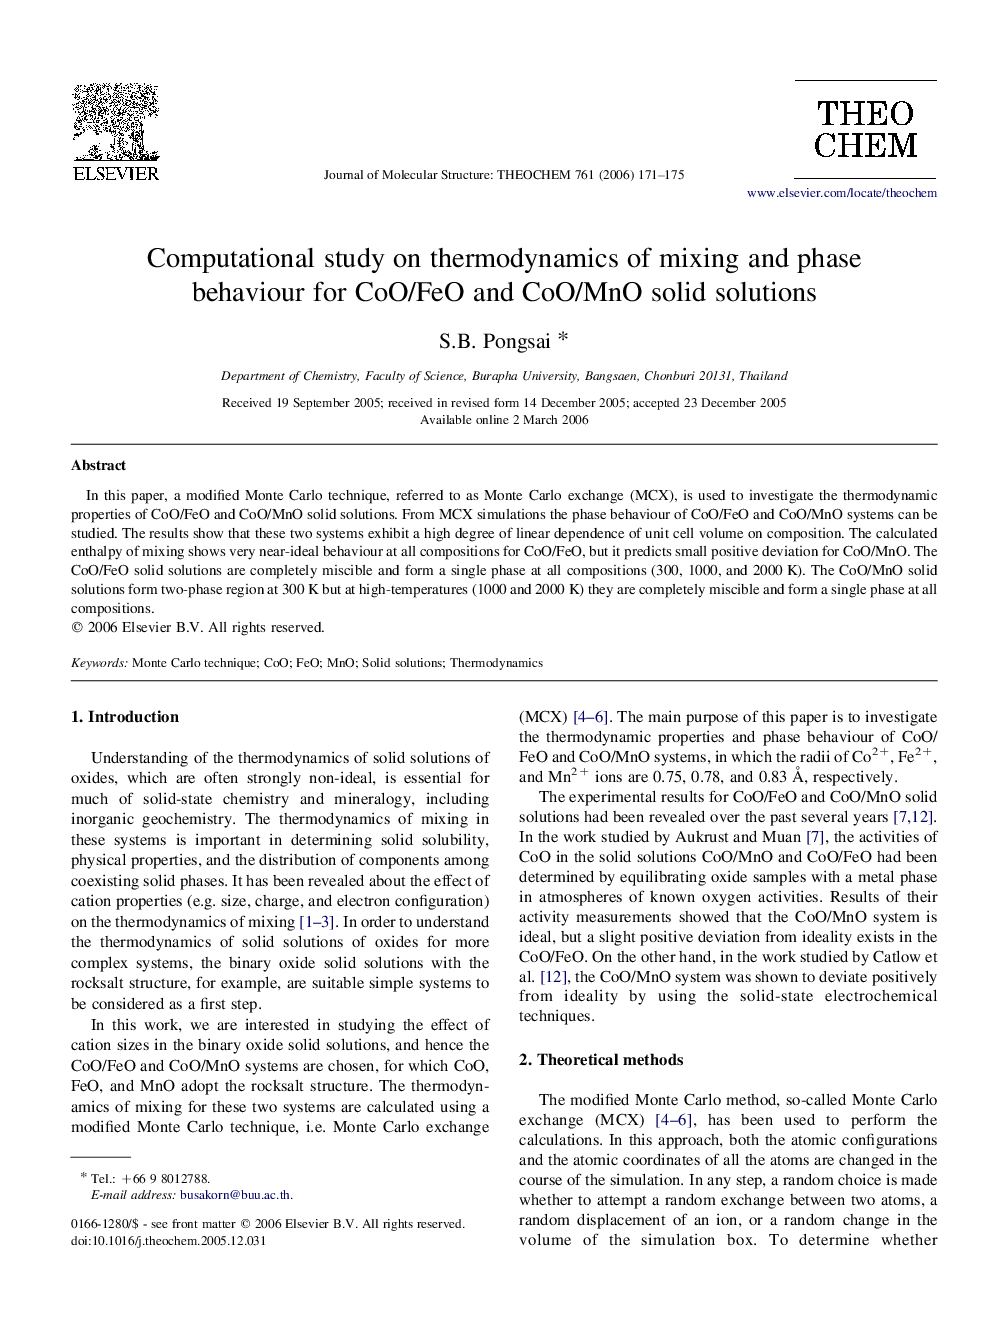 Computational study on thermodynamics of mixing and phase behaviour for CoO/FeO and CoO/MnO solid solutions